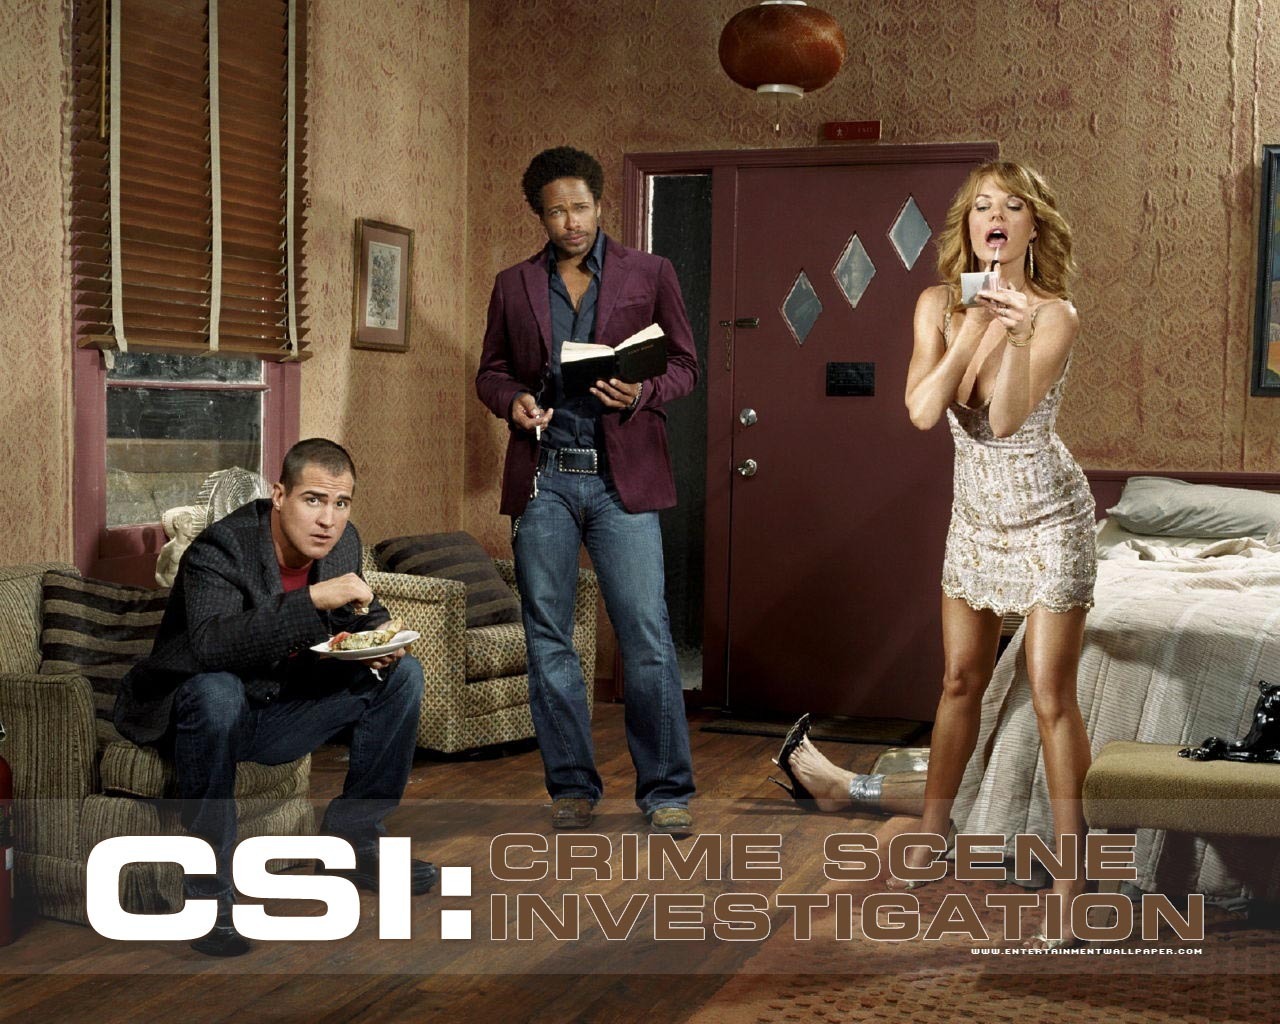 Csi Image HD Wallpaper And Background Photos